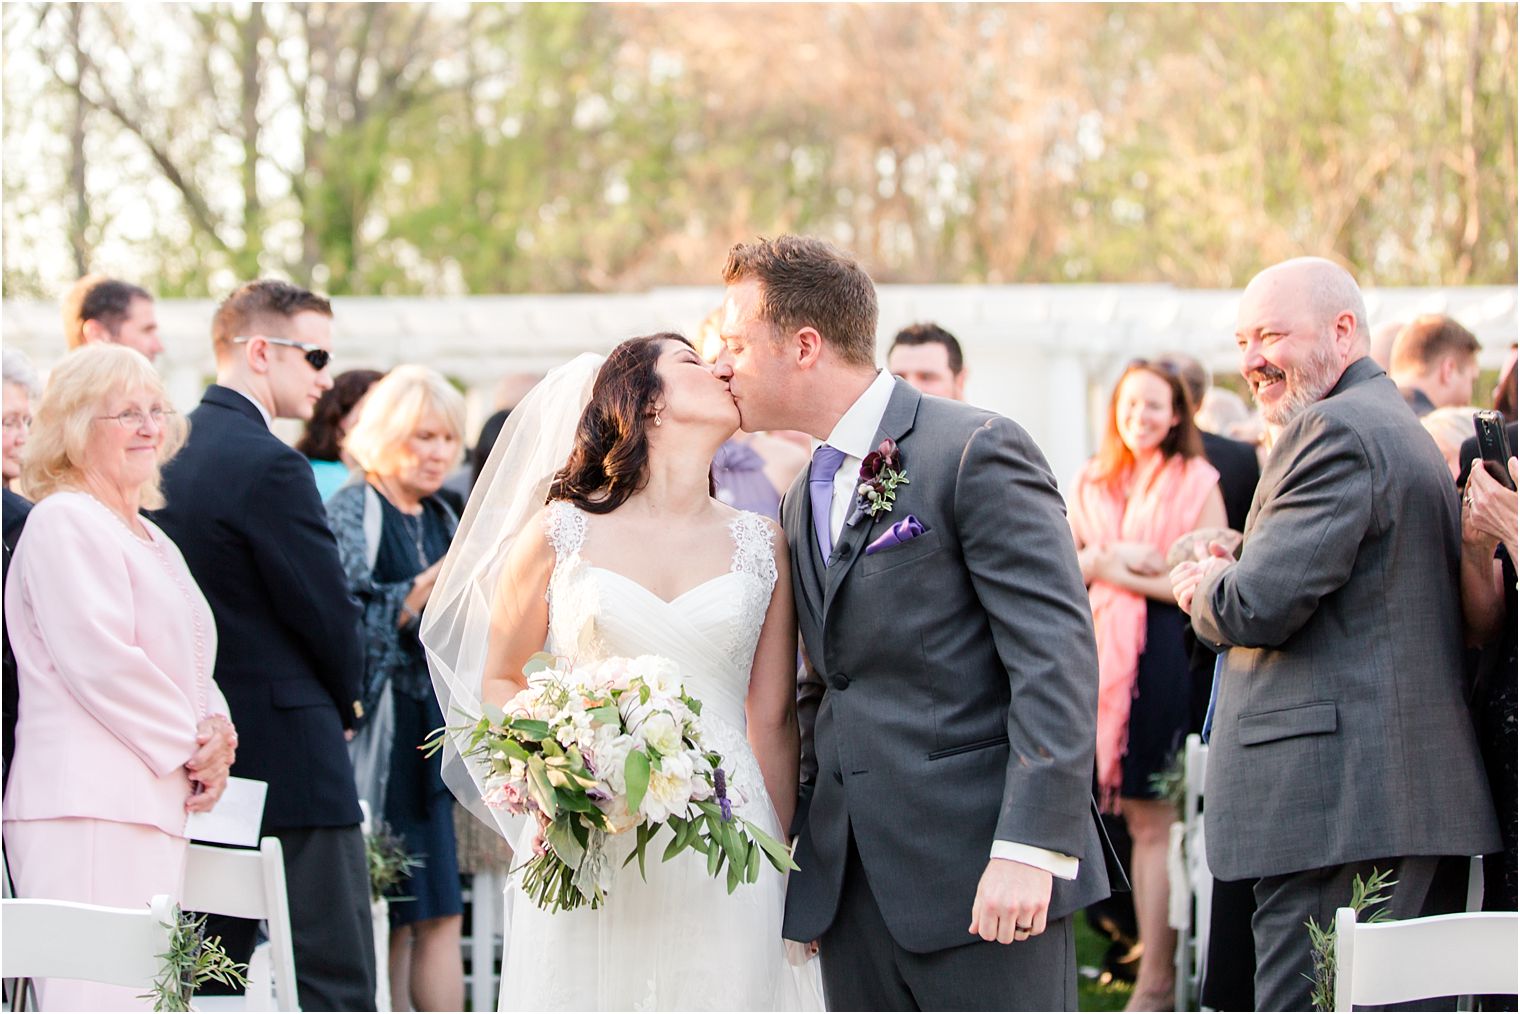 Bride and groom kiss during recessional